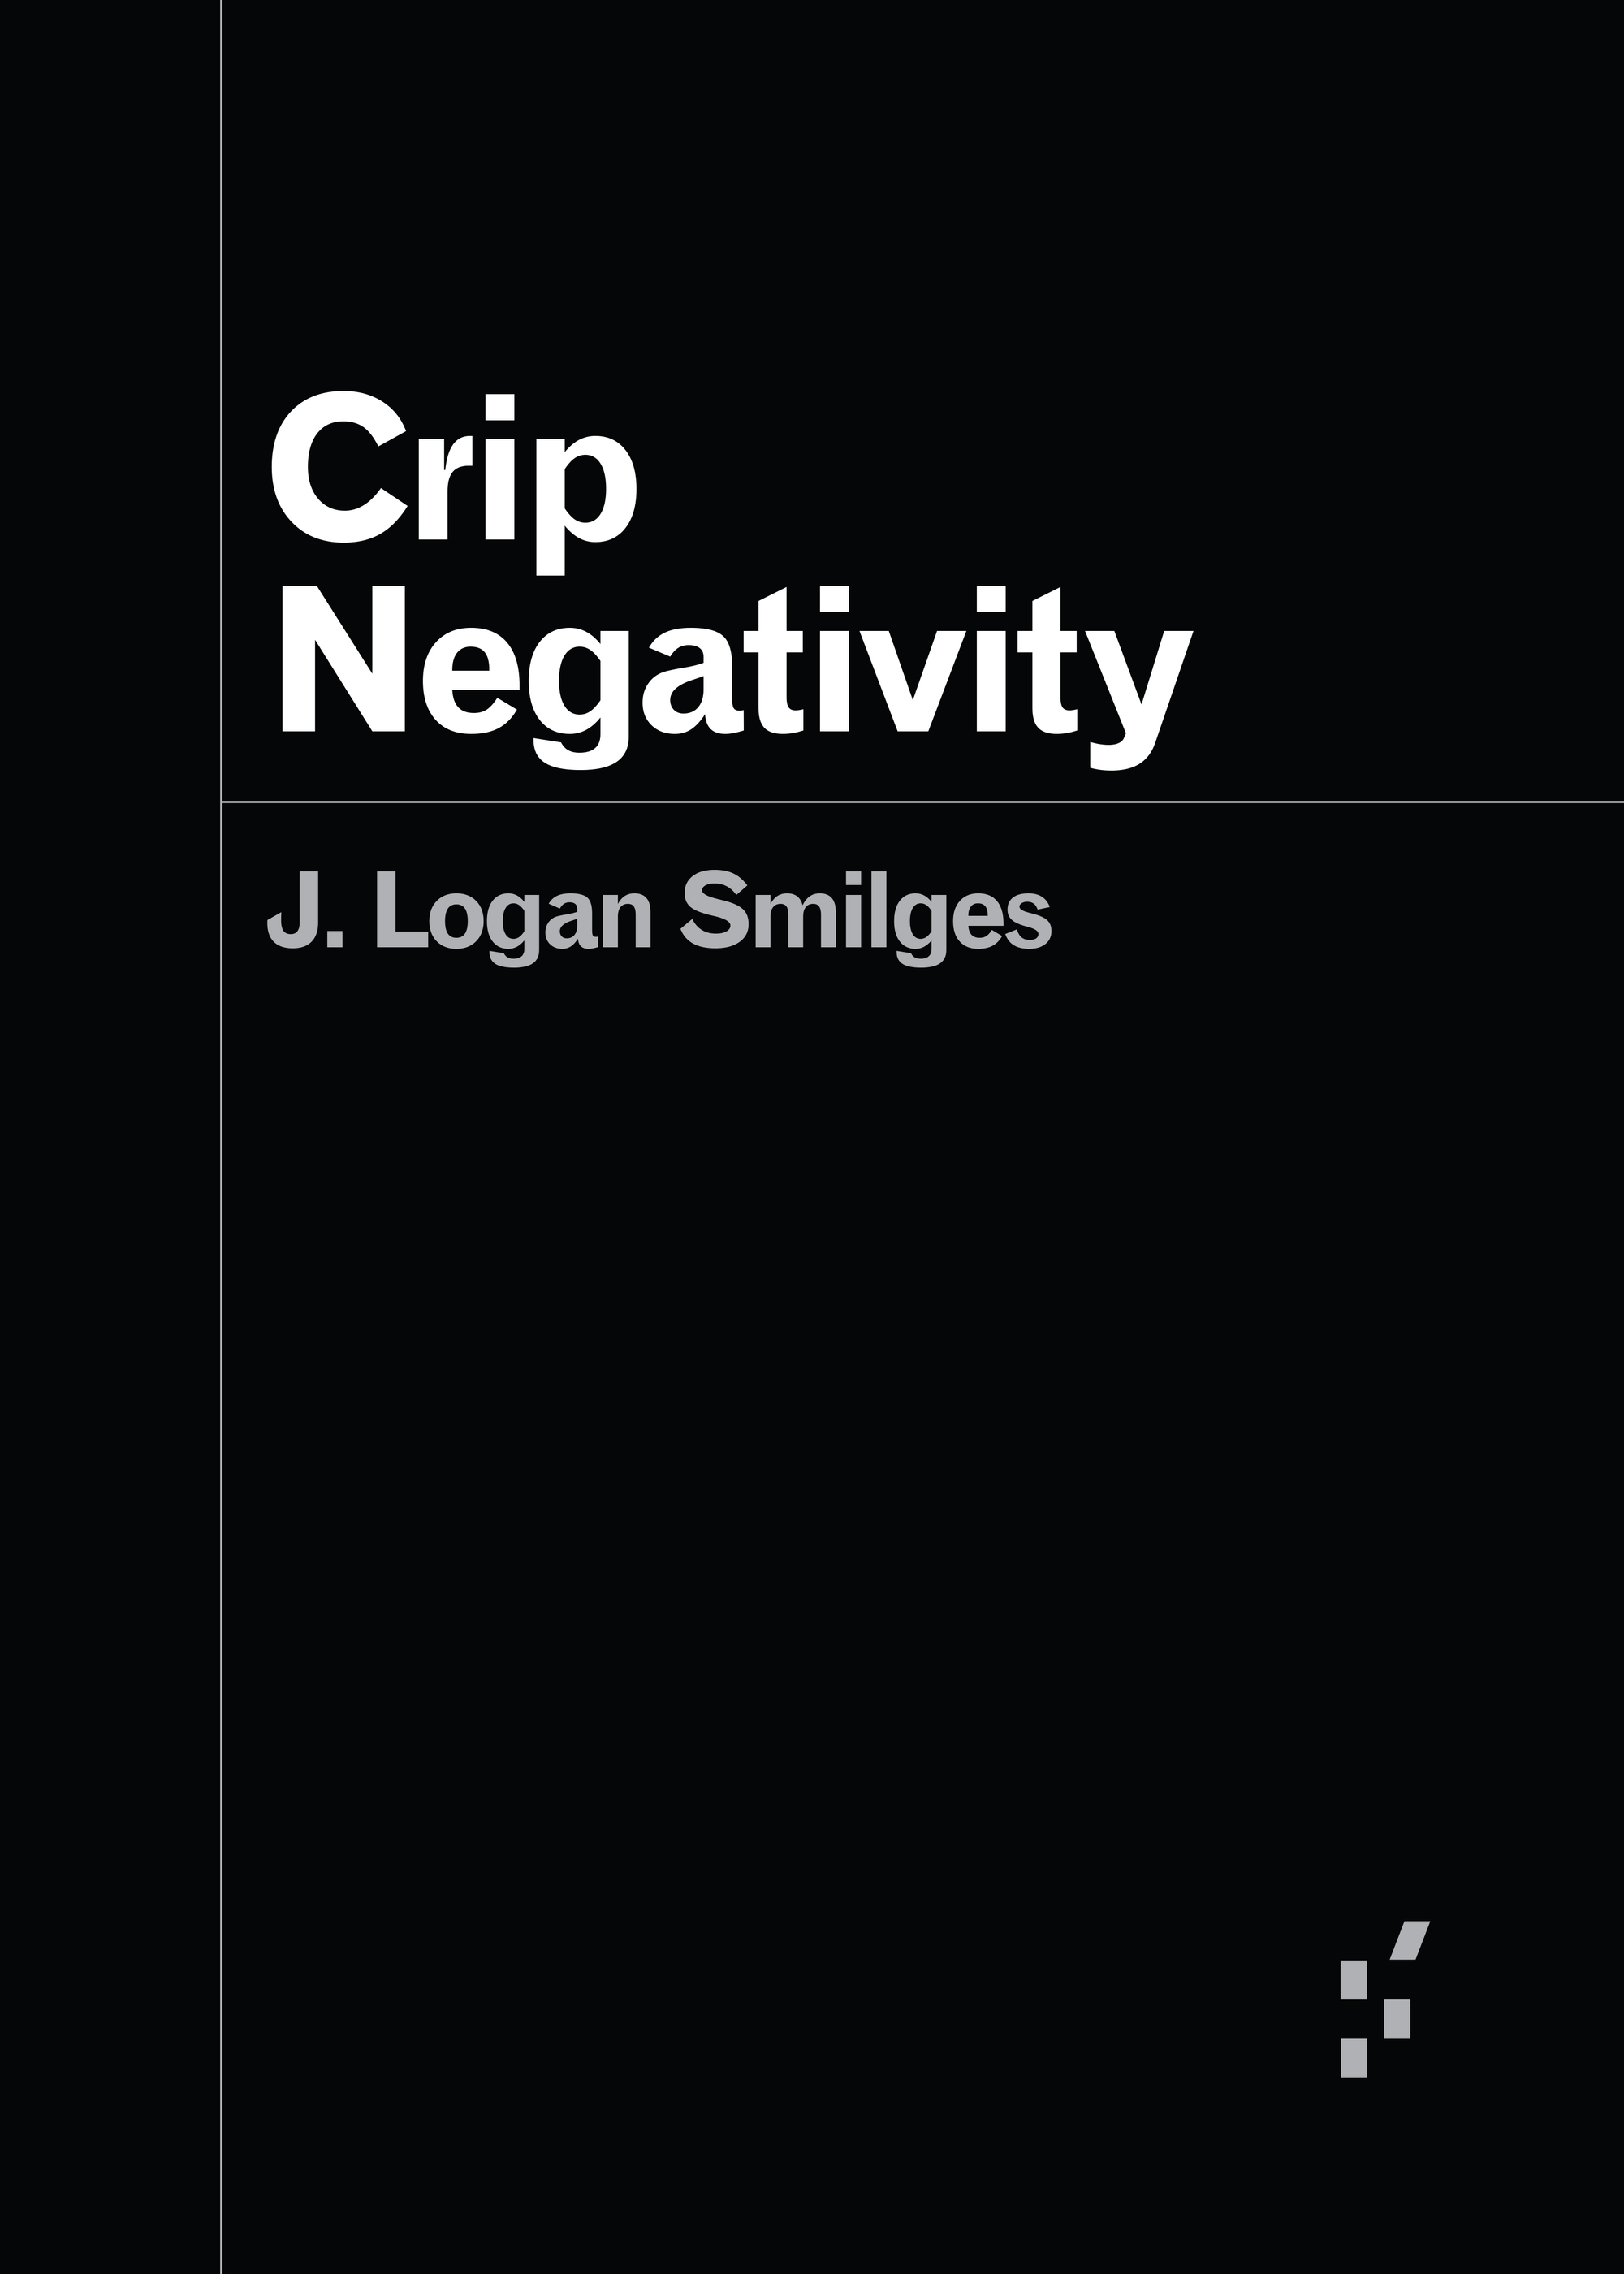 A black cover with white sans serif font reading, "Crip Negativity," with the author name following in gray font, "J. Logan Smilges." A thin gray line separates the title from the author name, and another thin gray line marks the spine. Book cover by Terence Smyre.